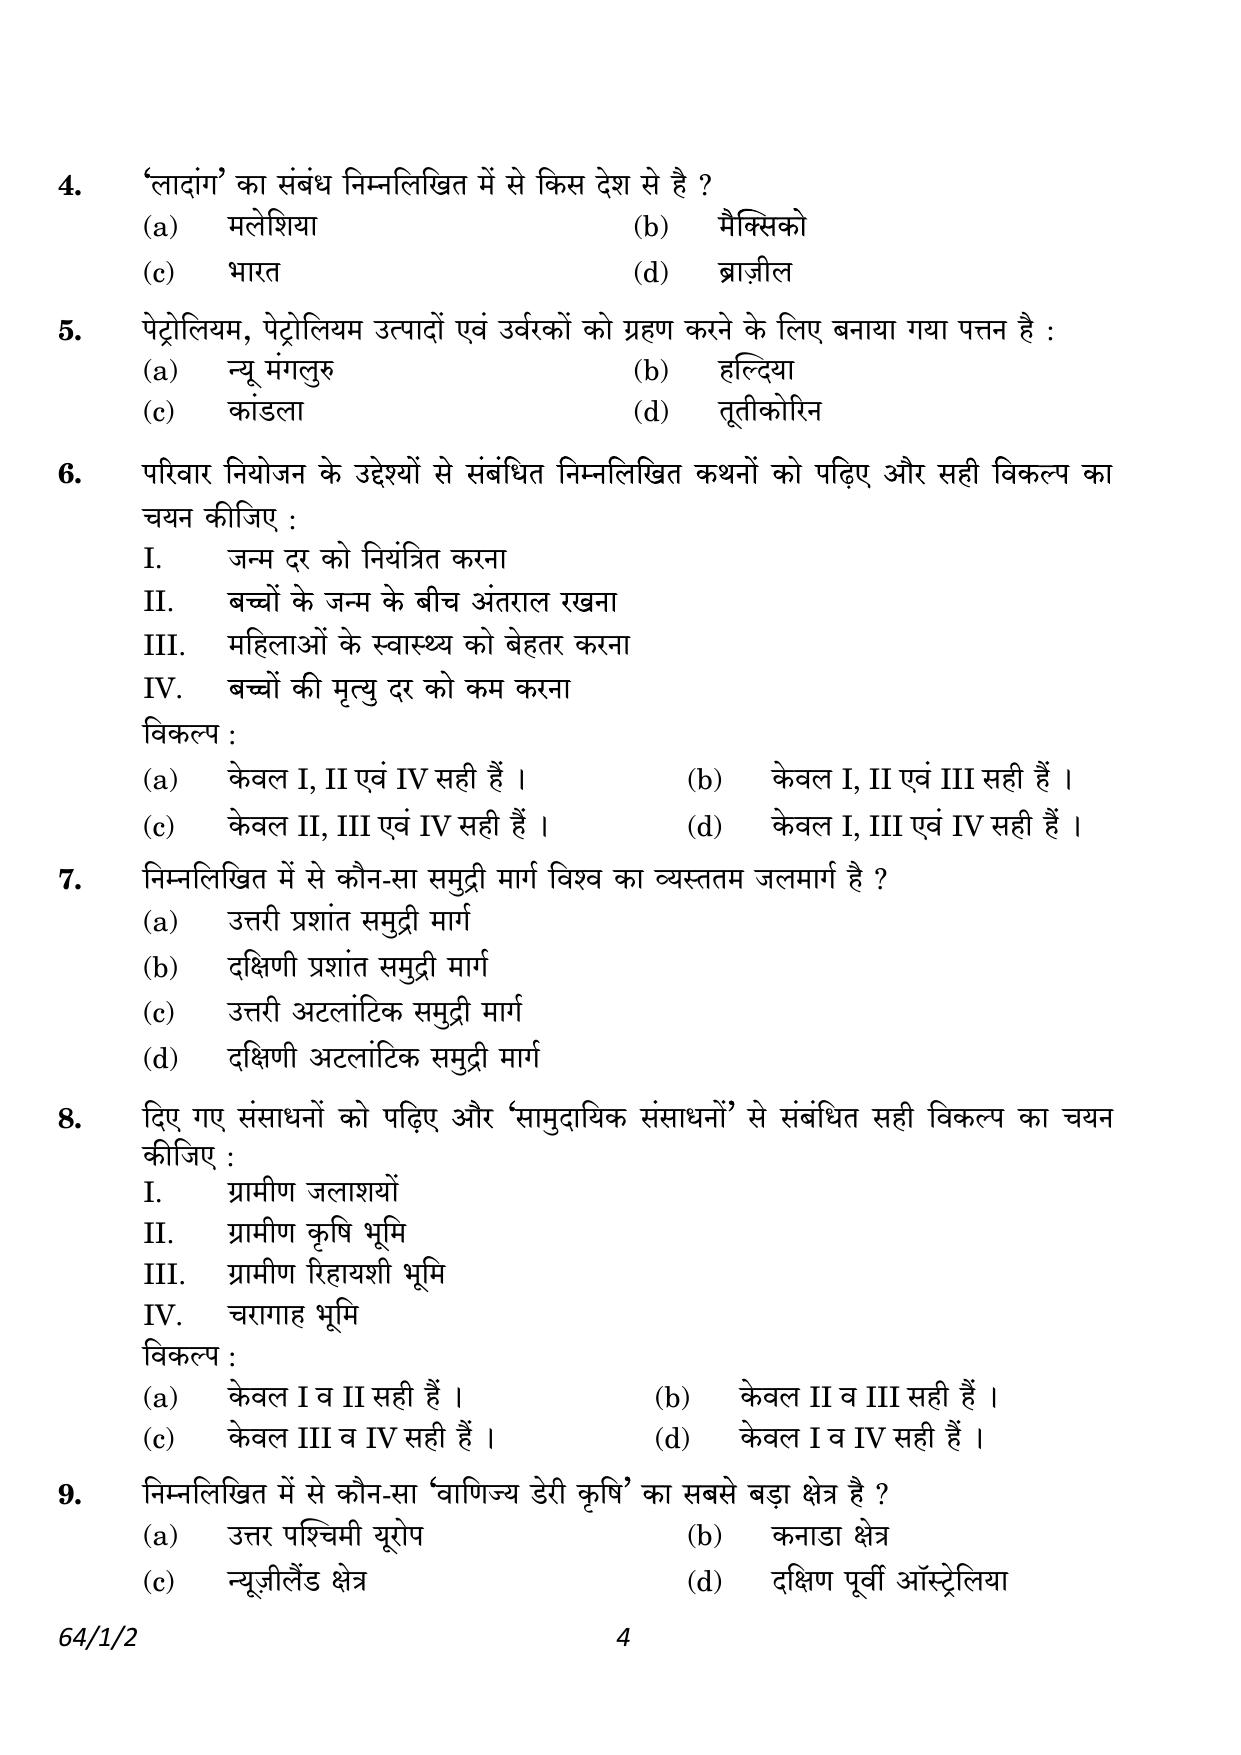 CBSE Class 12 64-1-2 Geography 2023 Question Paper - Page 4